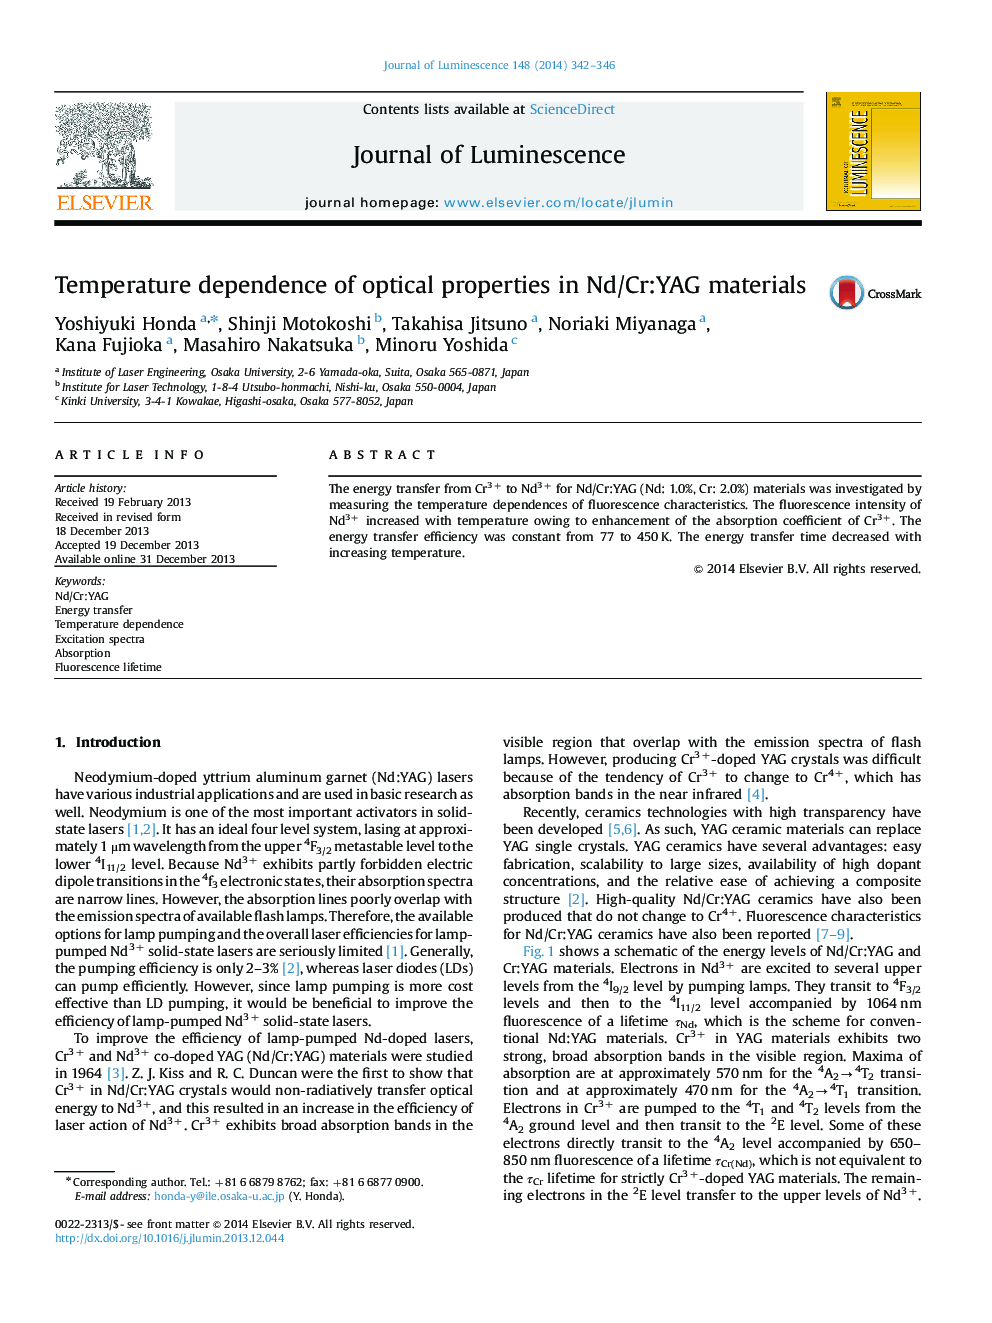 Temperature dependence of optical properties in Nd/Cr:YAG materials